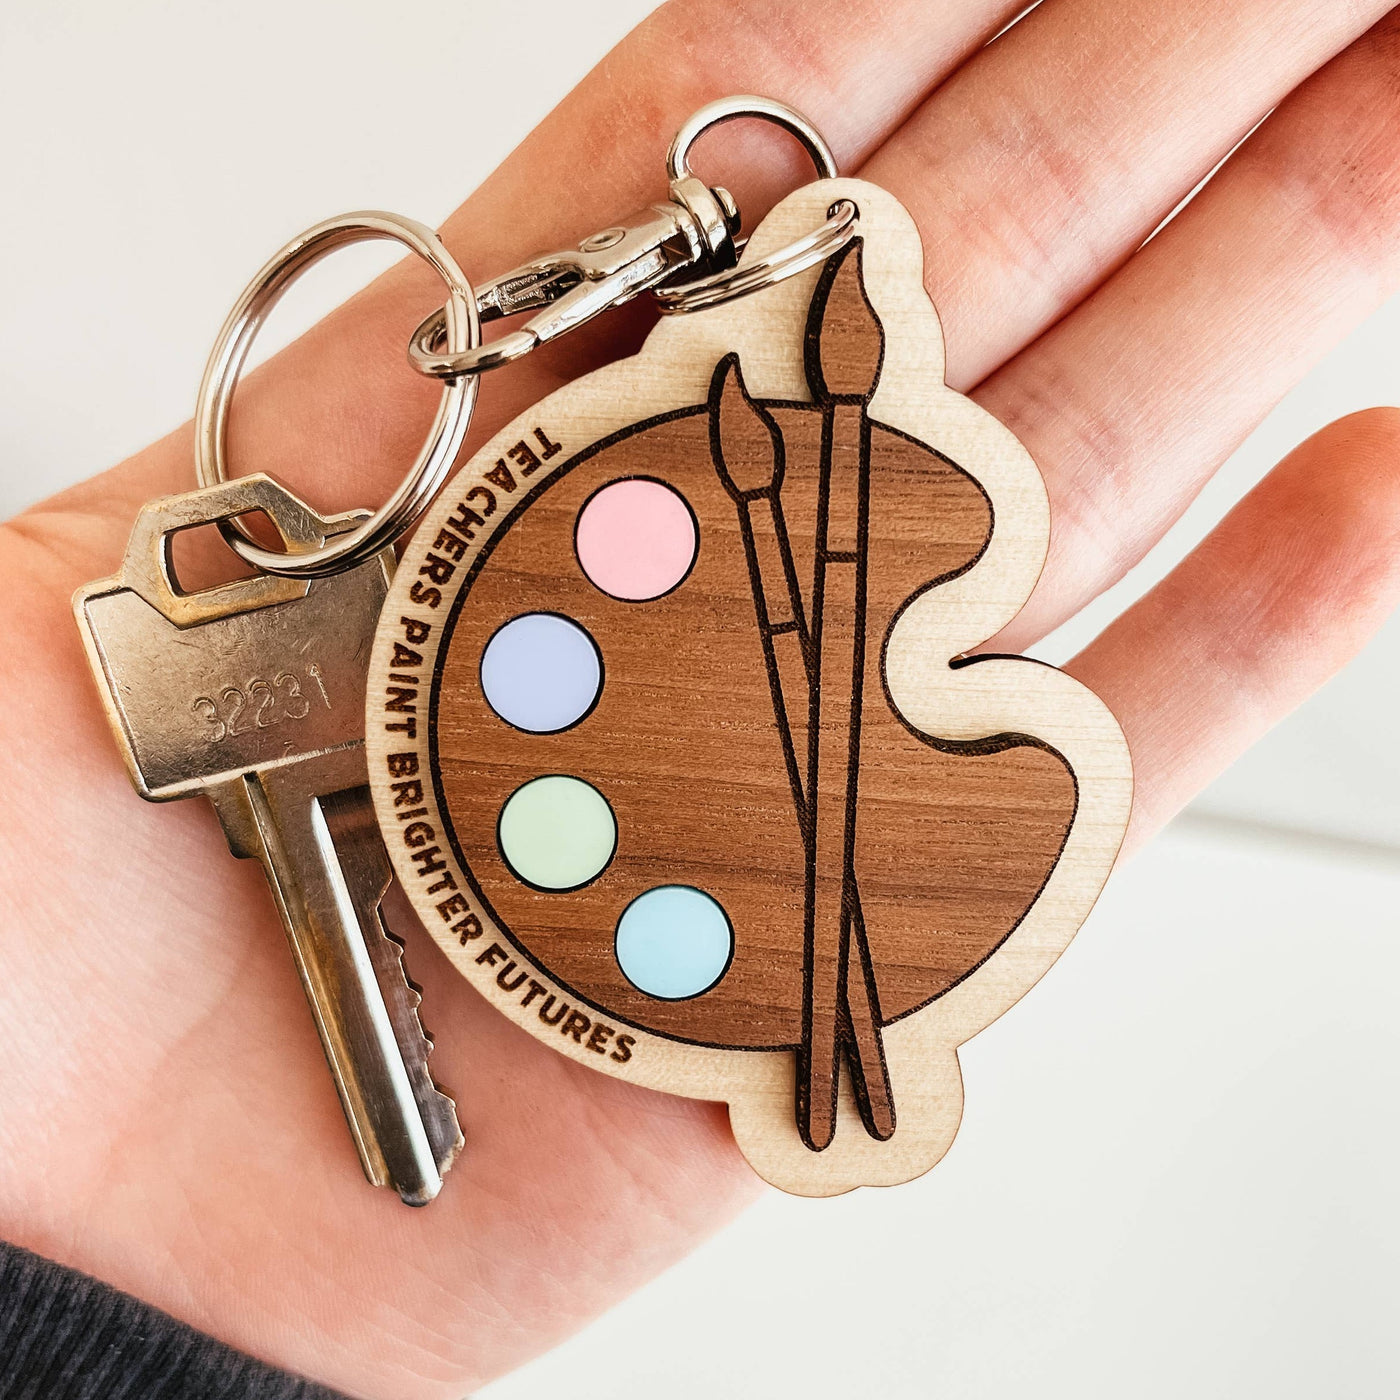 Knotty Design | Paint Palette Teacher Quote 3D Keychain, The Local Space, Local Canadian Brands